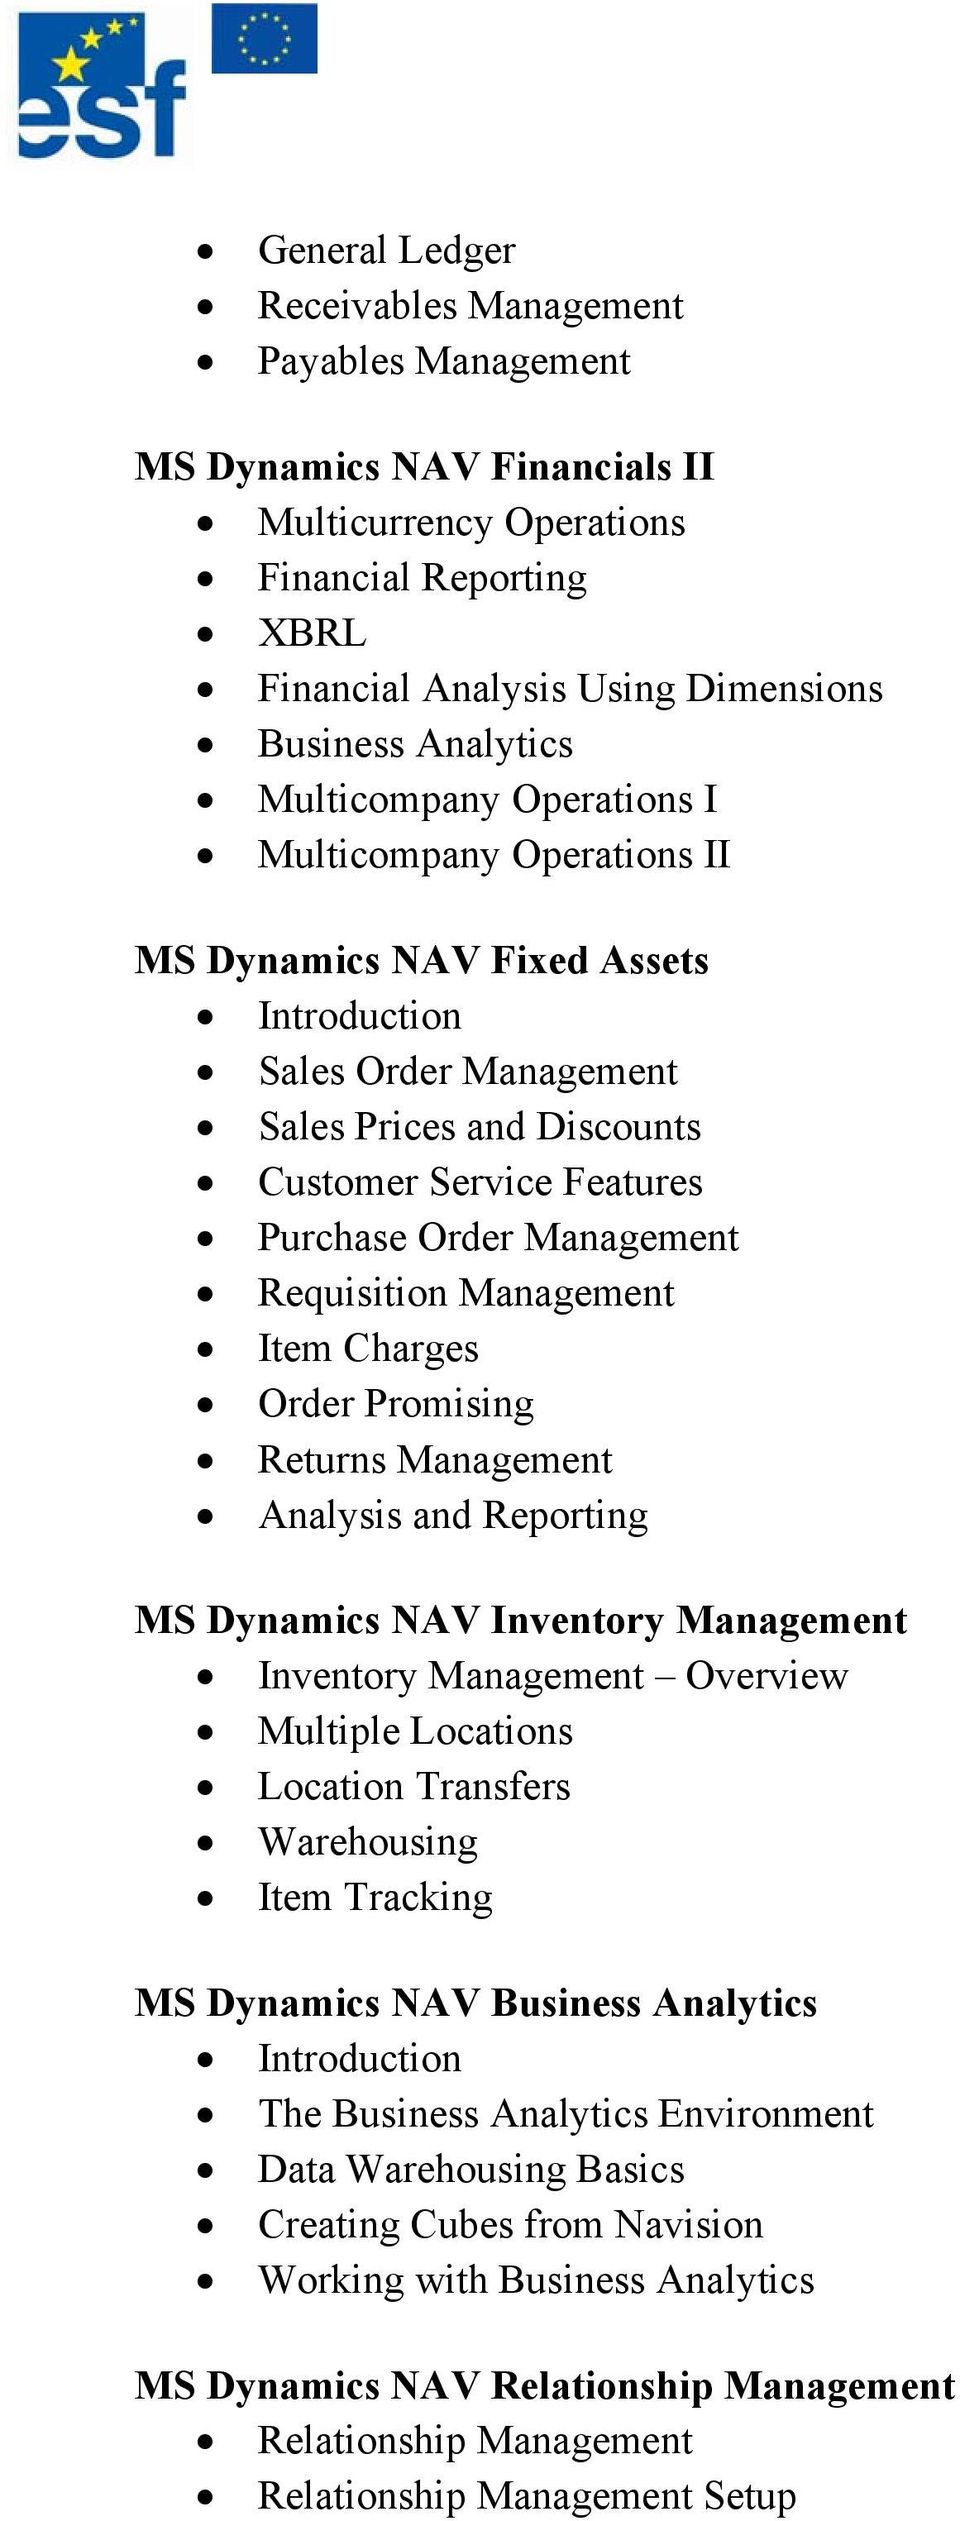 Requisition Management Item Charges Order Promising Returns Management Analysis and Reporting MS Dynamics NAV Inventory Management Inventory Management Overview Multiple Locations Location Transfers